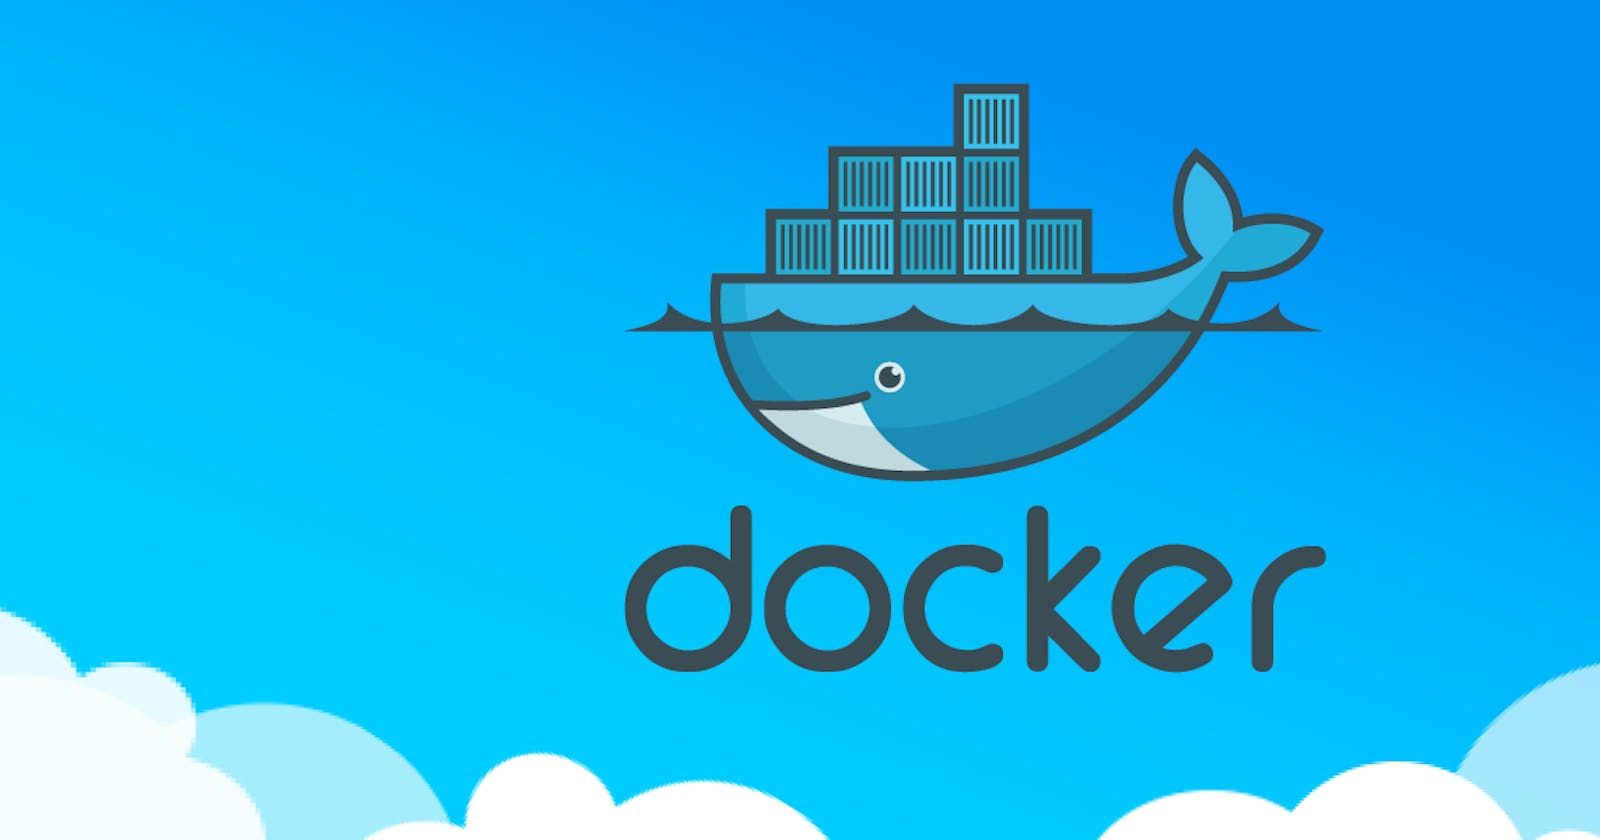 Get started with Docker with these 10 commands